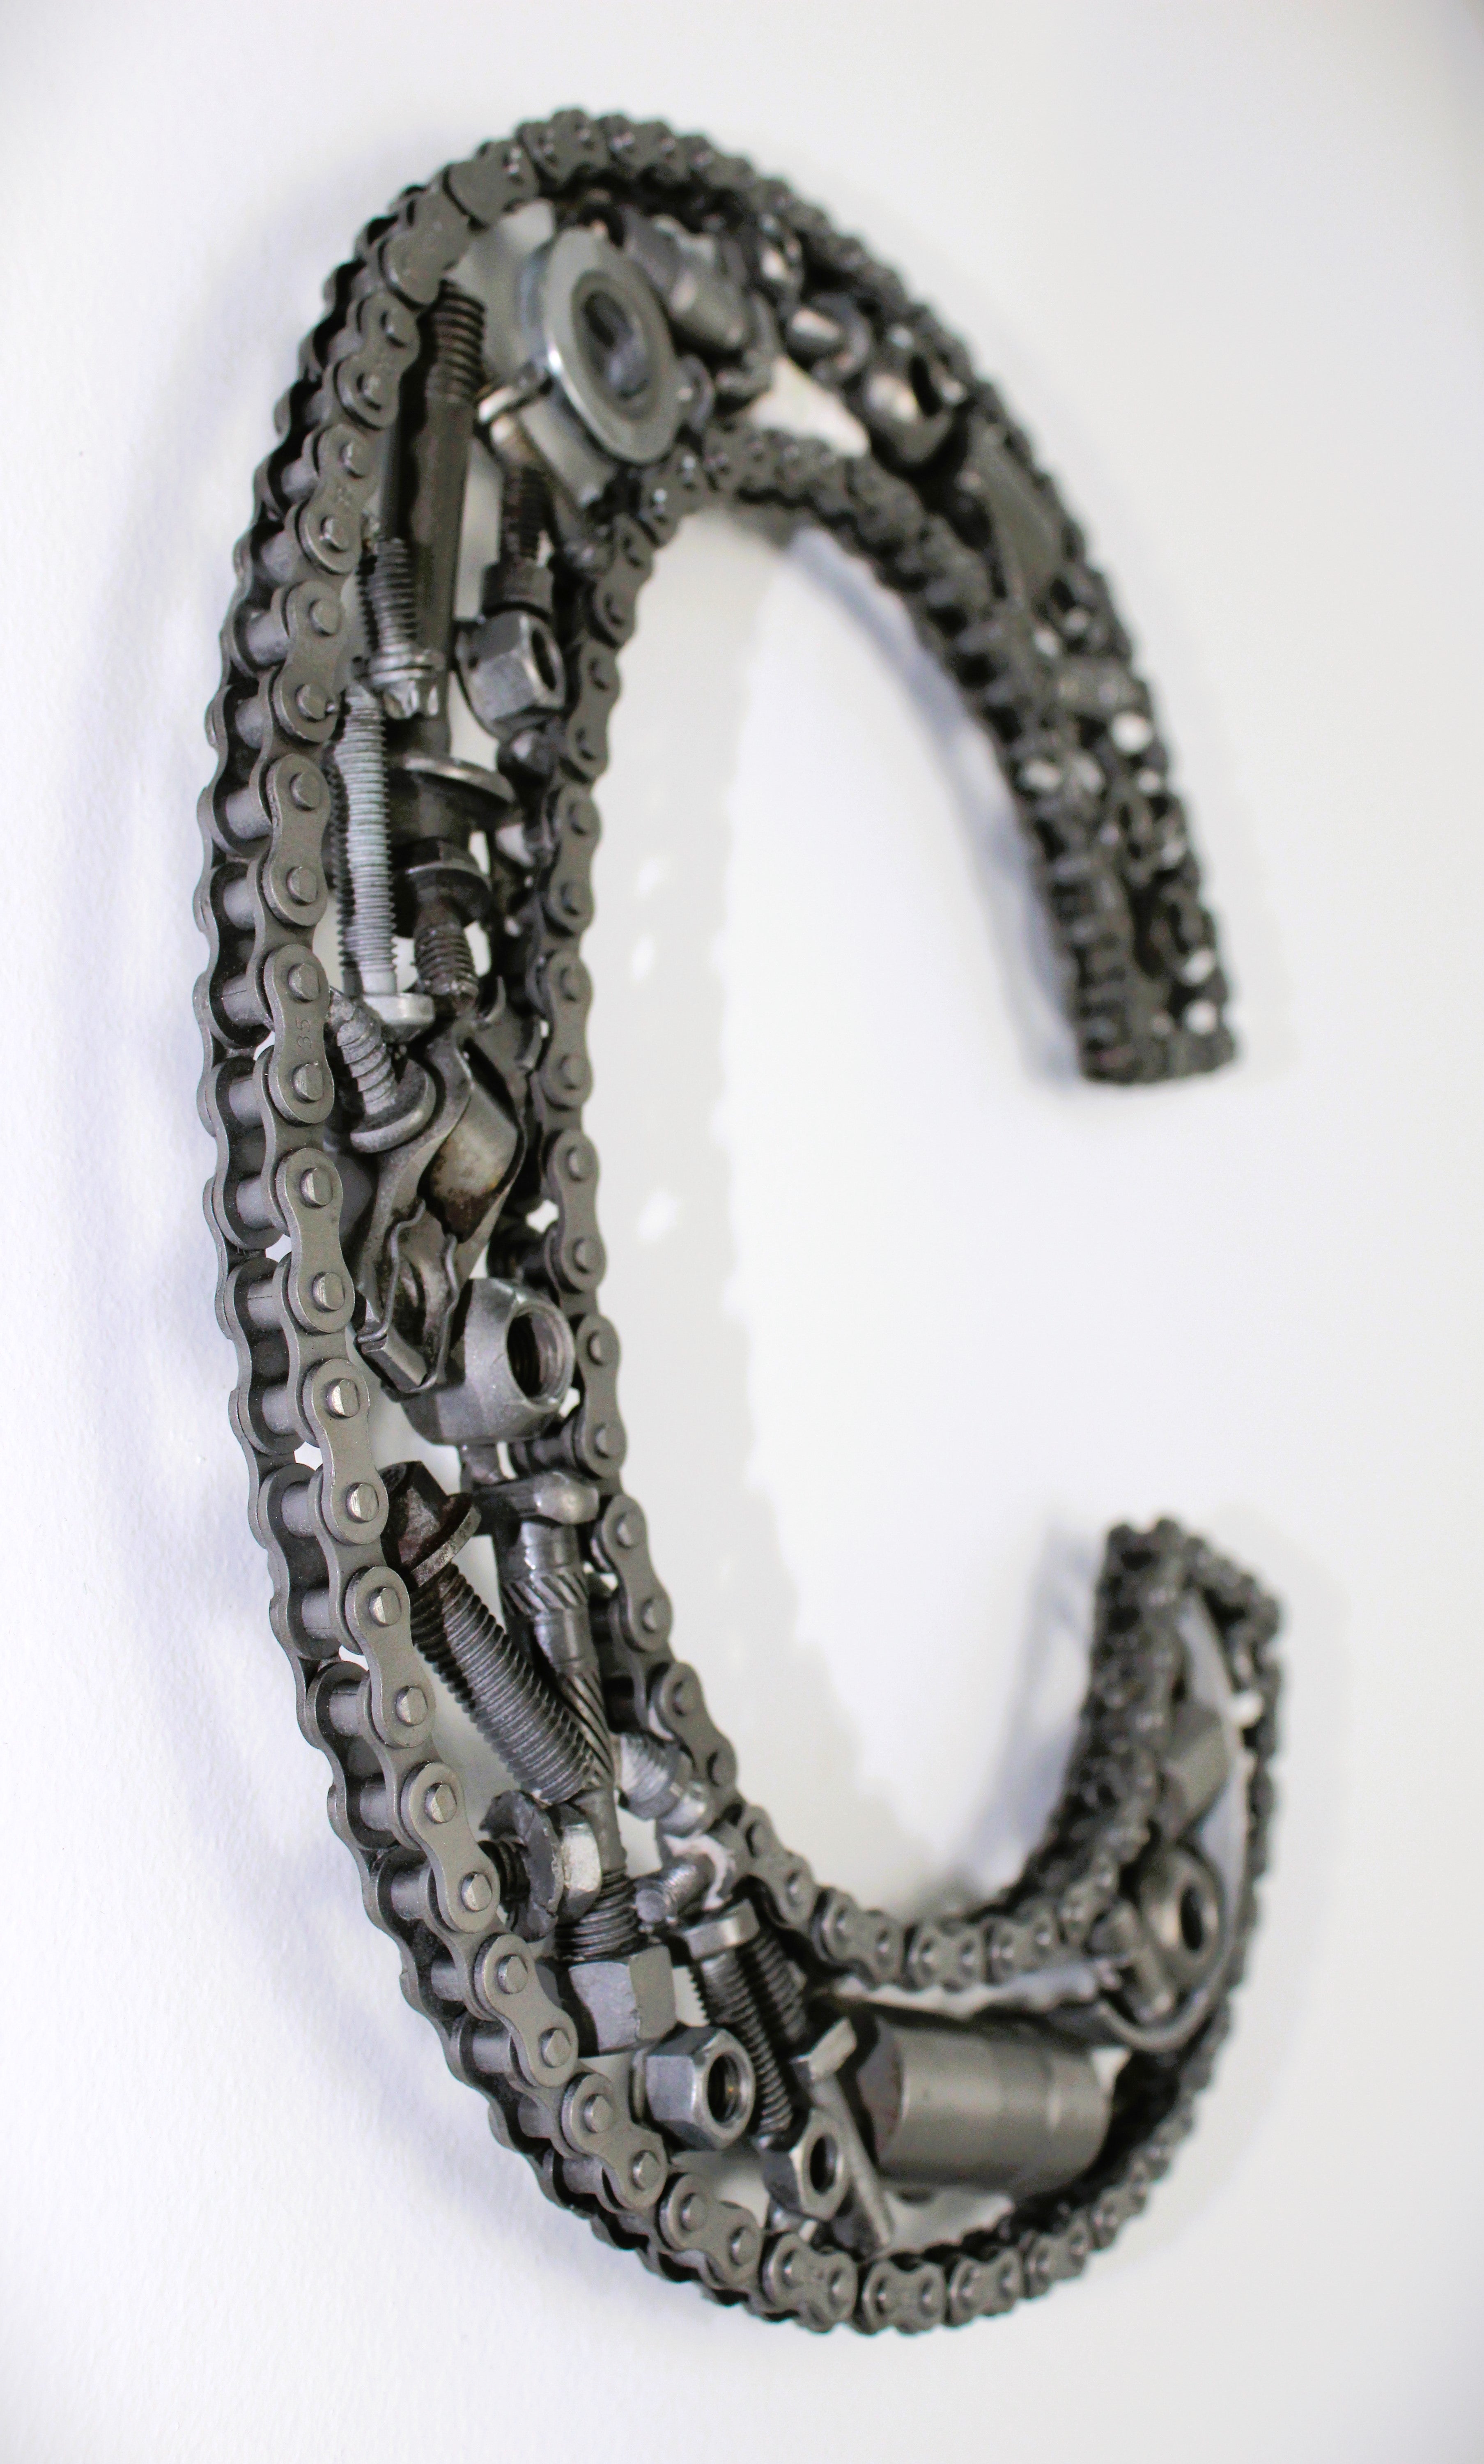 A letter C made out of real car parts, outlined with a timing chain.